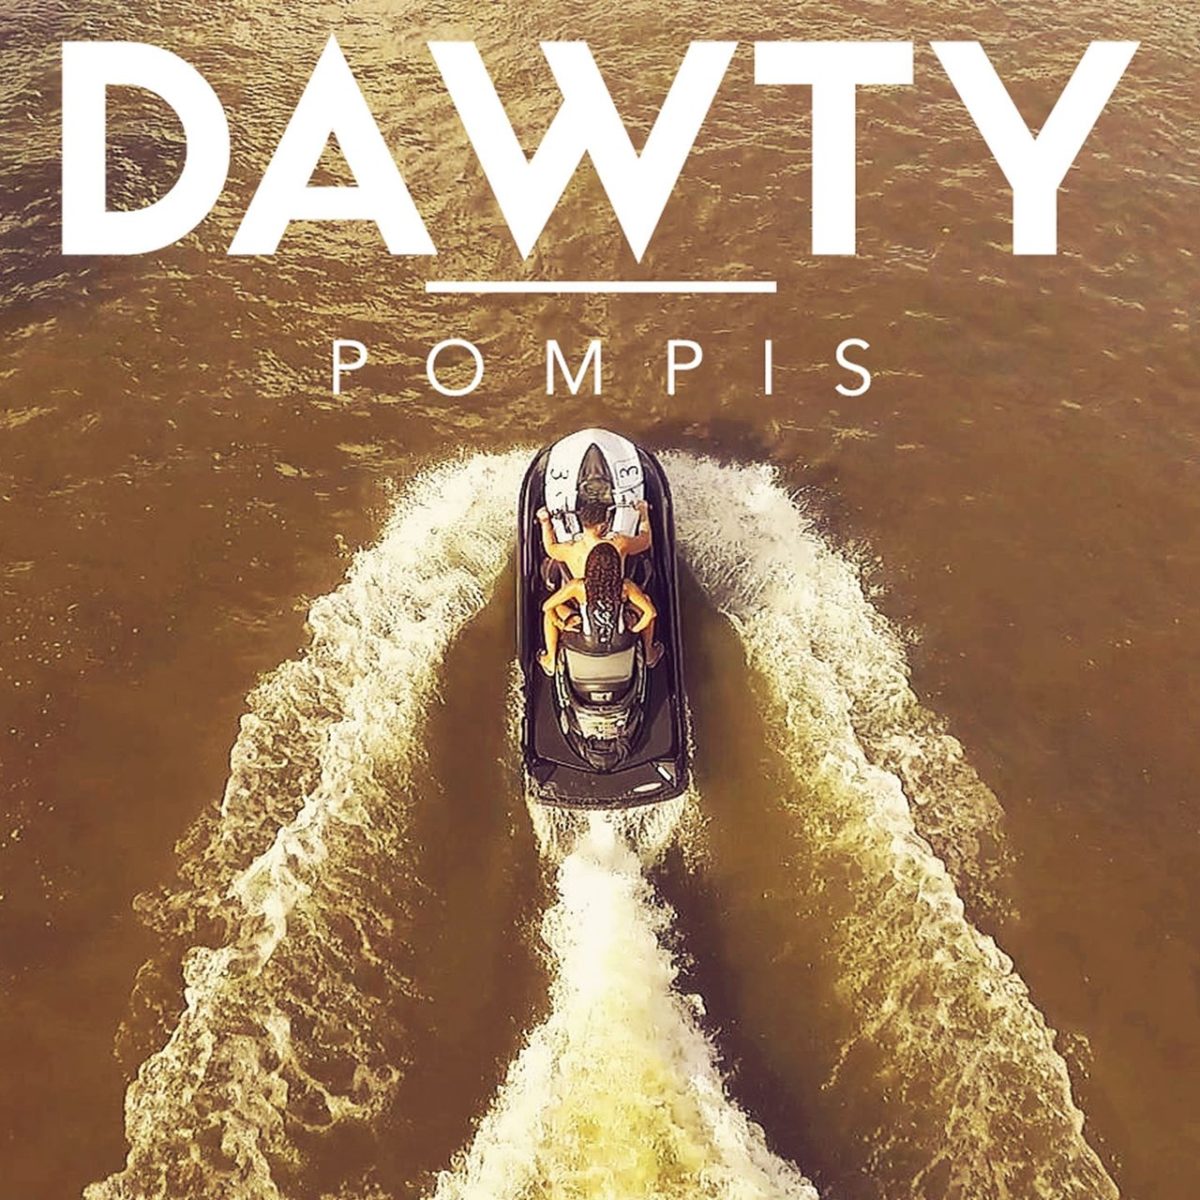 Pompis - Dawty (Cover)